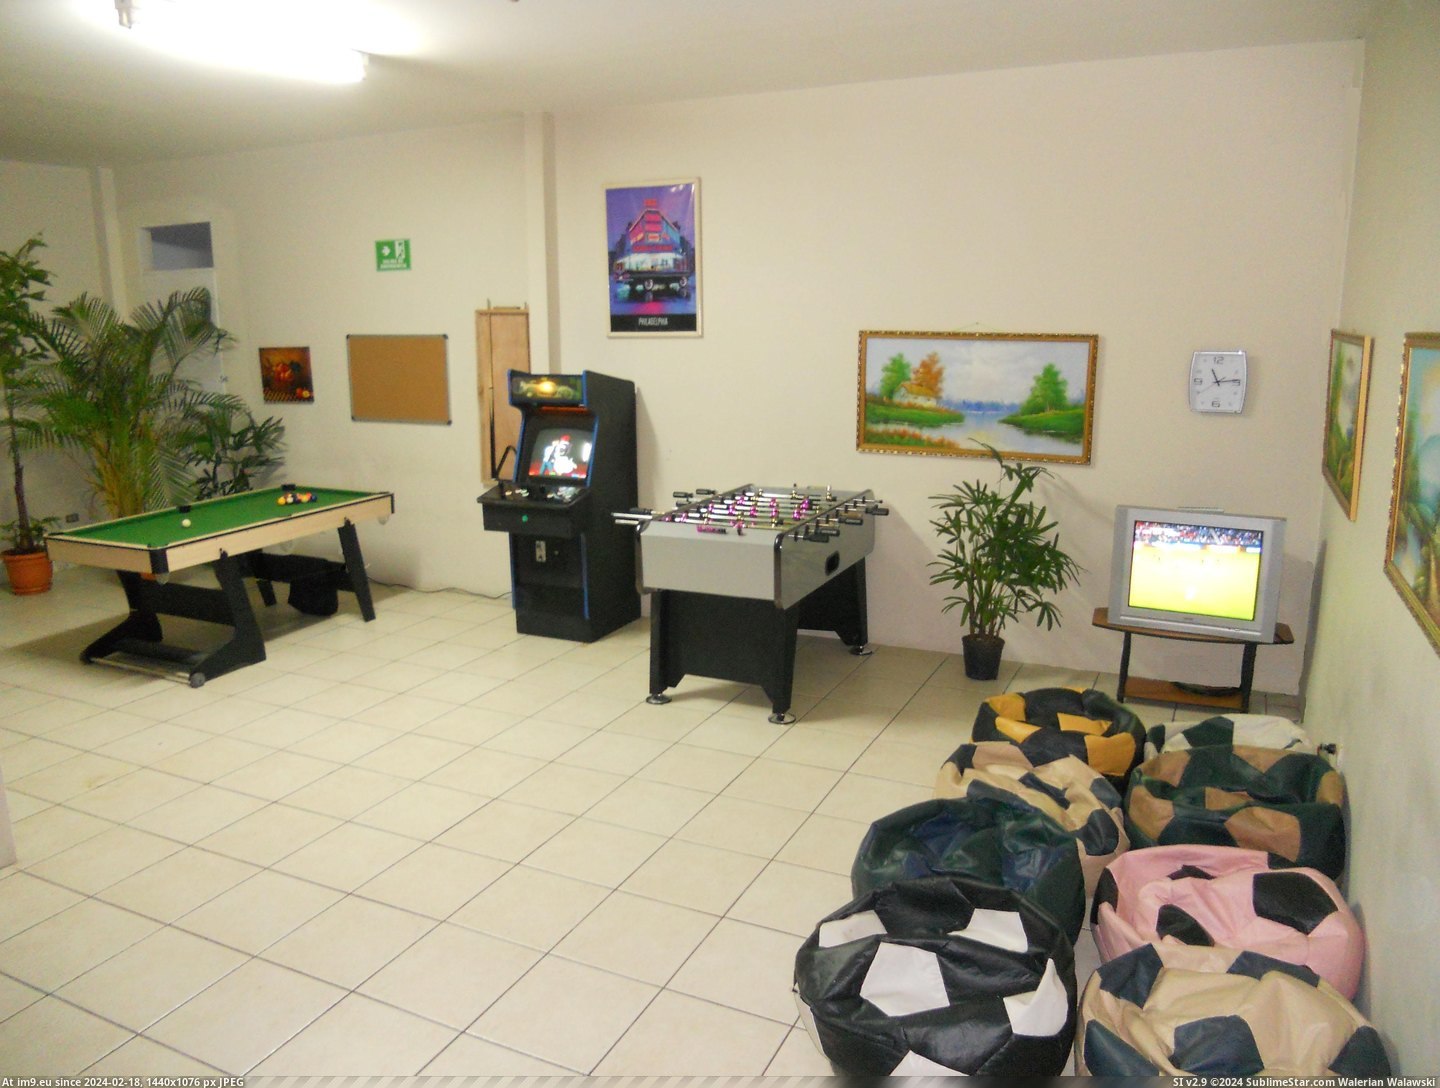 #Game #Designs #Centre #Room CONTACT CENTRE GAME ROOM DESIGNS 2010 Pic. (Image of album BEST BOSS SUPPORTS EMPLOYEE GAME ROOM VIDEO ARCADE))